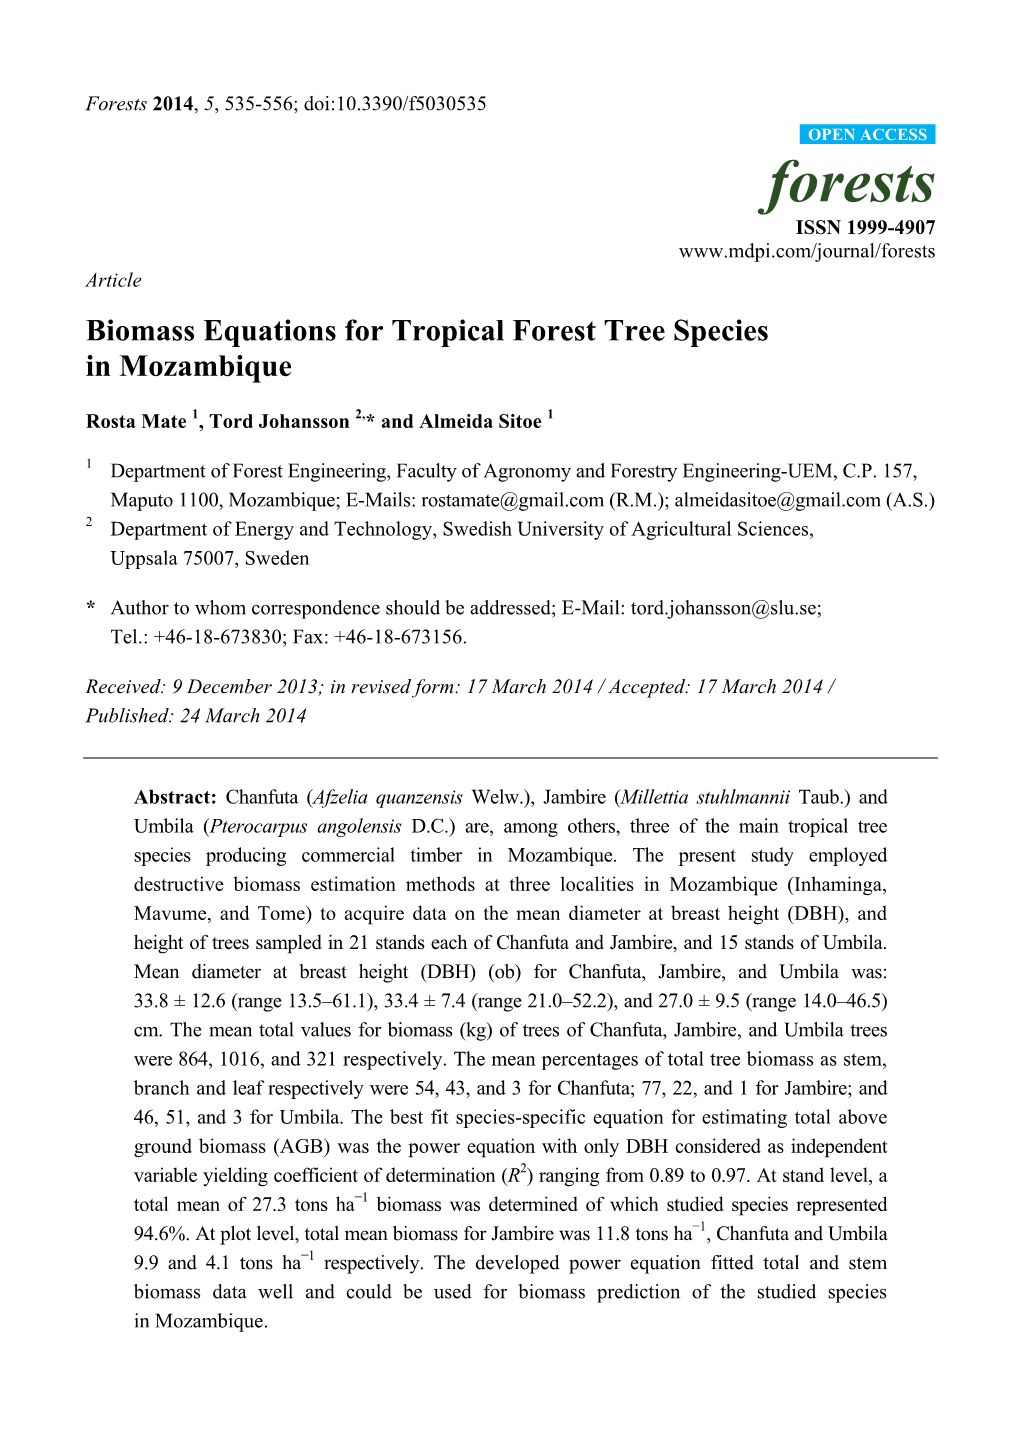 Biomass Equations for Tropical Forest Tree Species in Mozambique